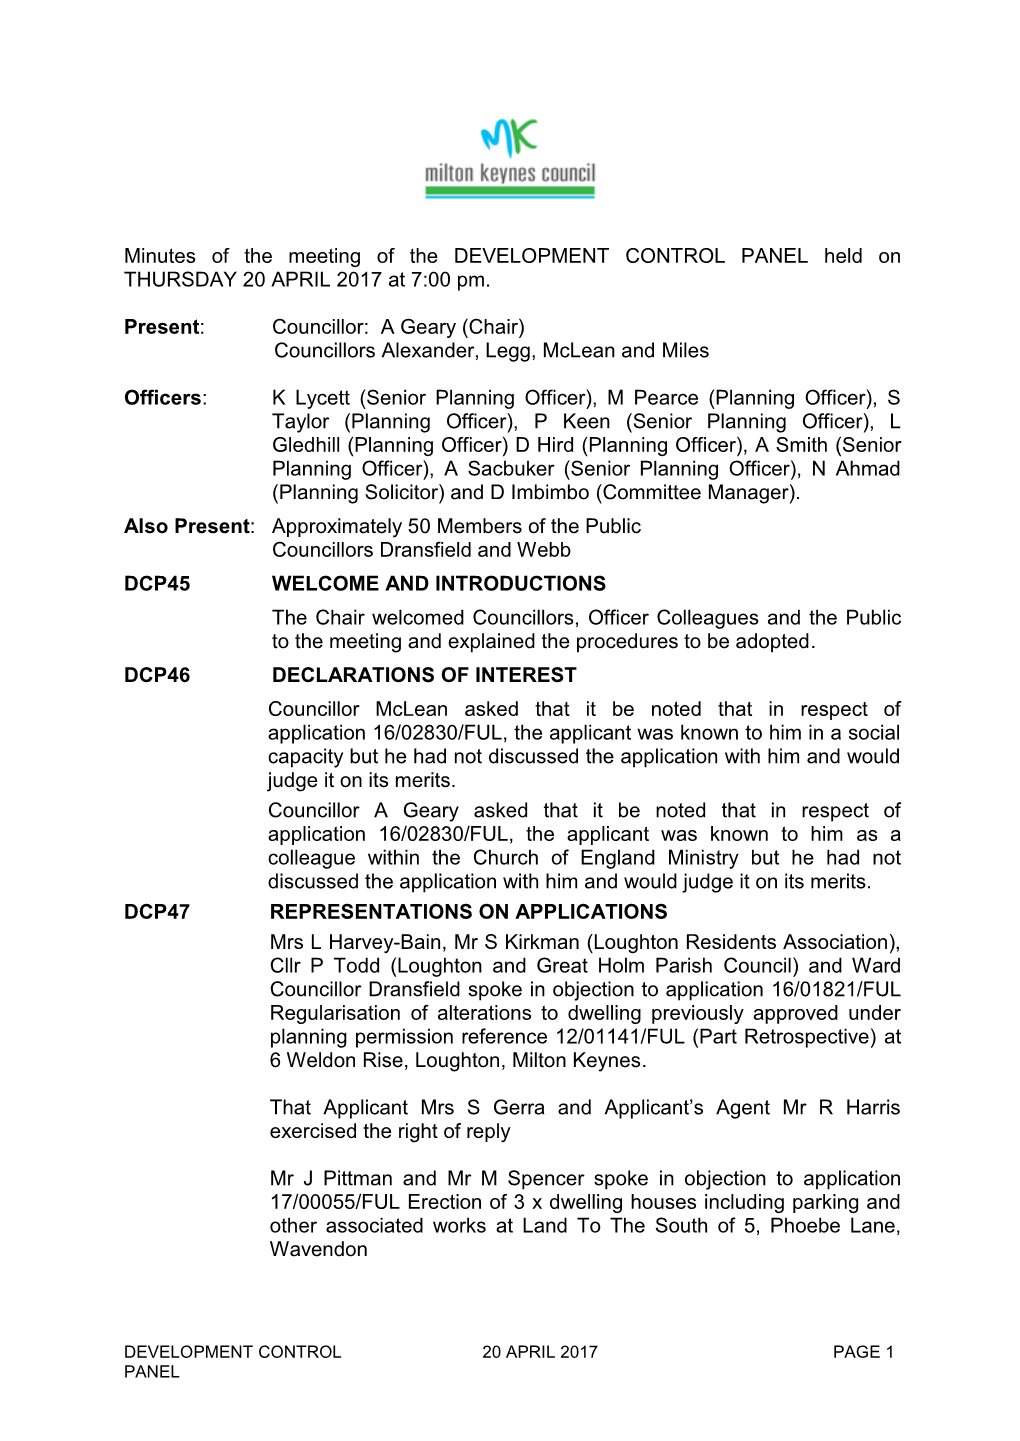 Minutes of the Meeting of the DEVELOPMENT CONTROL PANEL Held on THURSDAY 20 APRIL 2017 at 7:00 Pm. Present: Councillor: a Geary